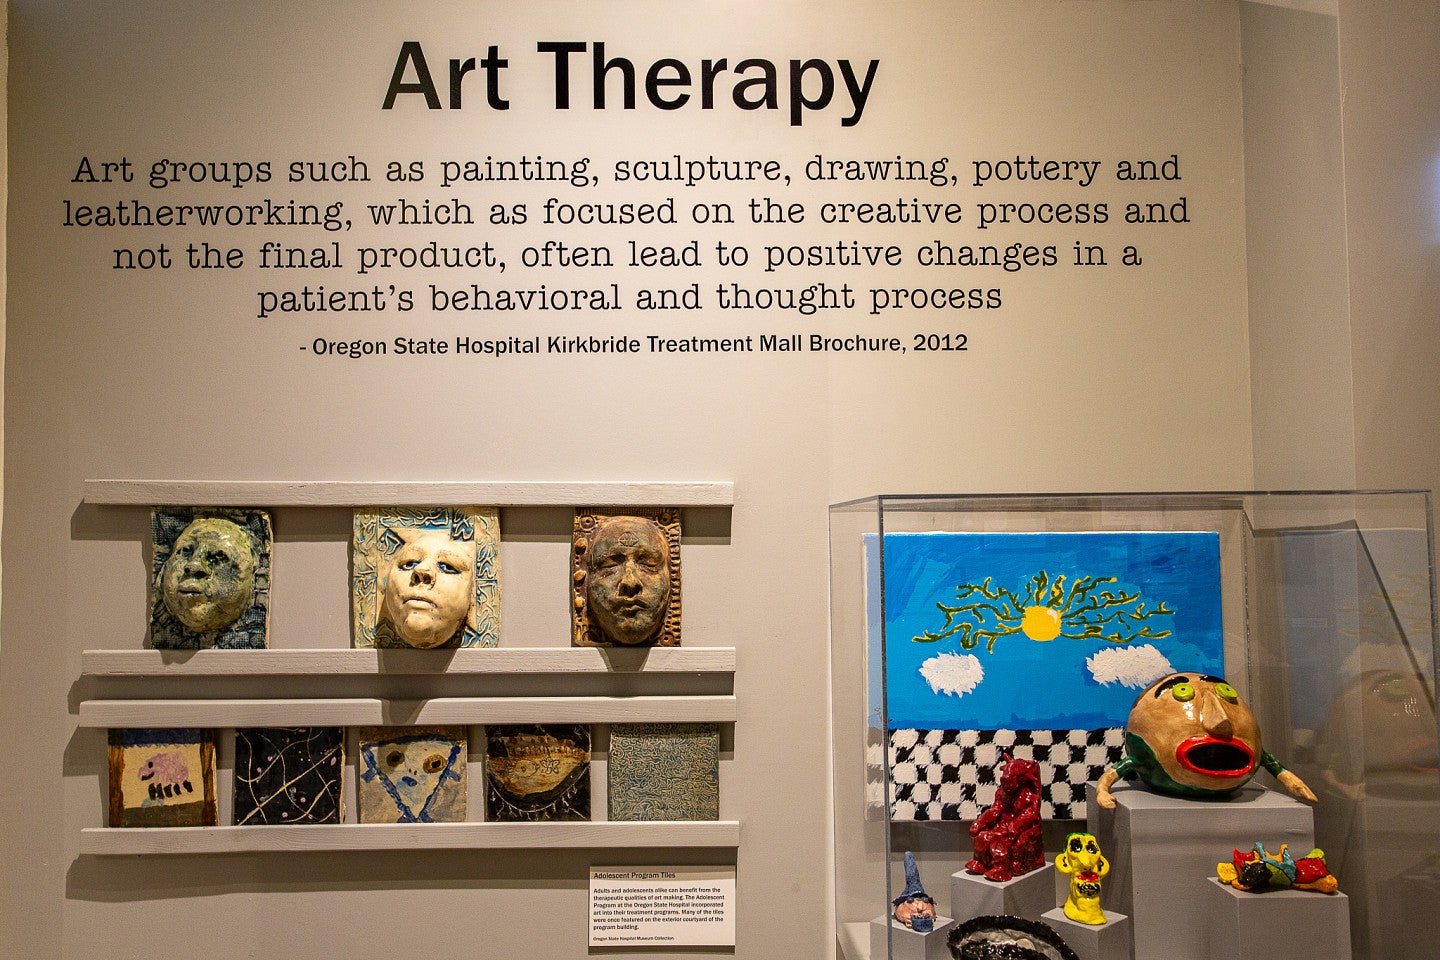 Art Therapy exhibit with multiple ceramic scupltures and paintings. There is text reading: "Art Therapy. Art groups such as painting, sculpture, drawing, pottery, and leather working, which as focused  on the creative process and not the final product, often lead to positive changes in a patients behavioral and thought process."